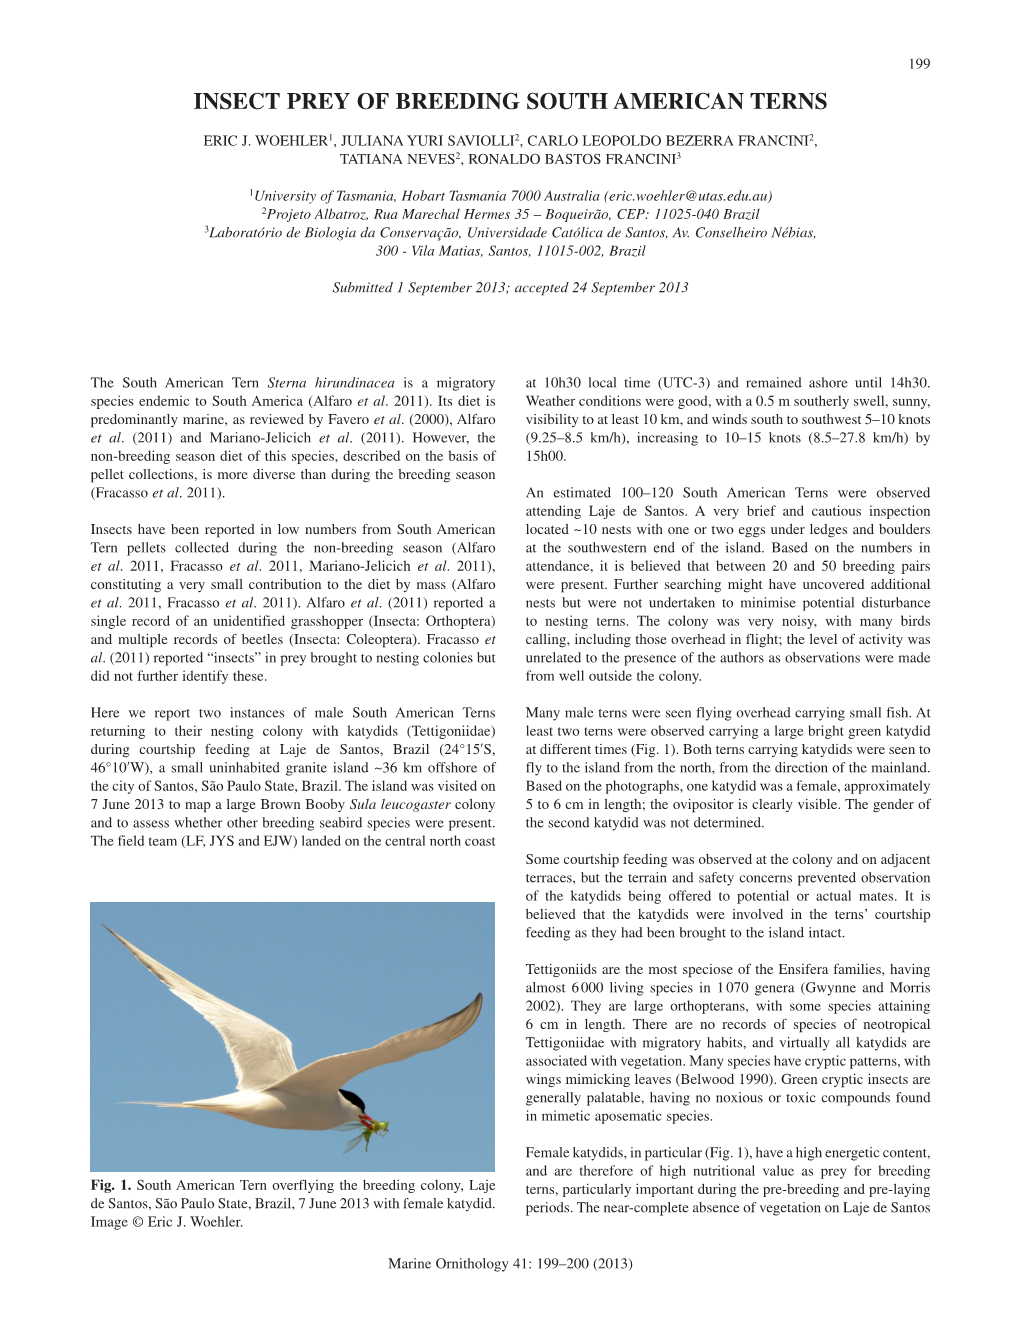 Insect Prey of Breeding South American Terns